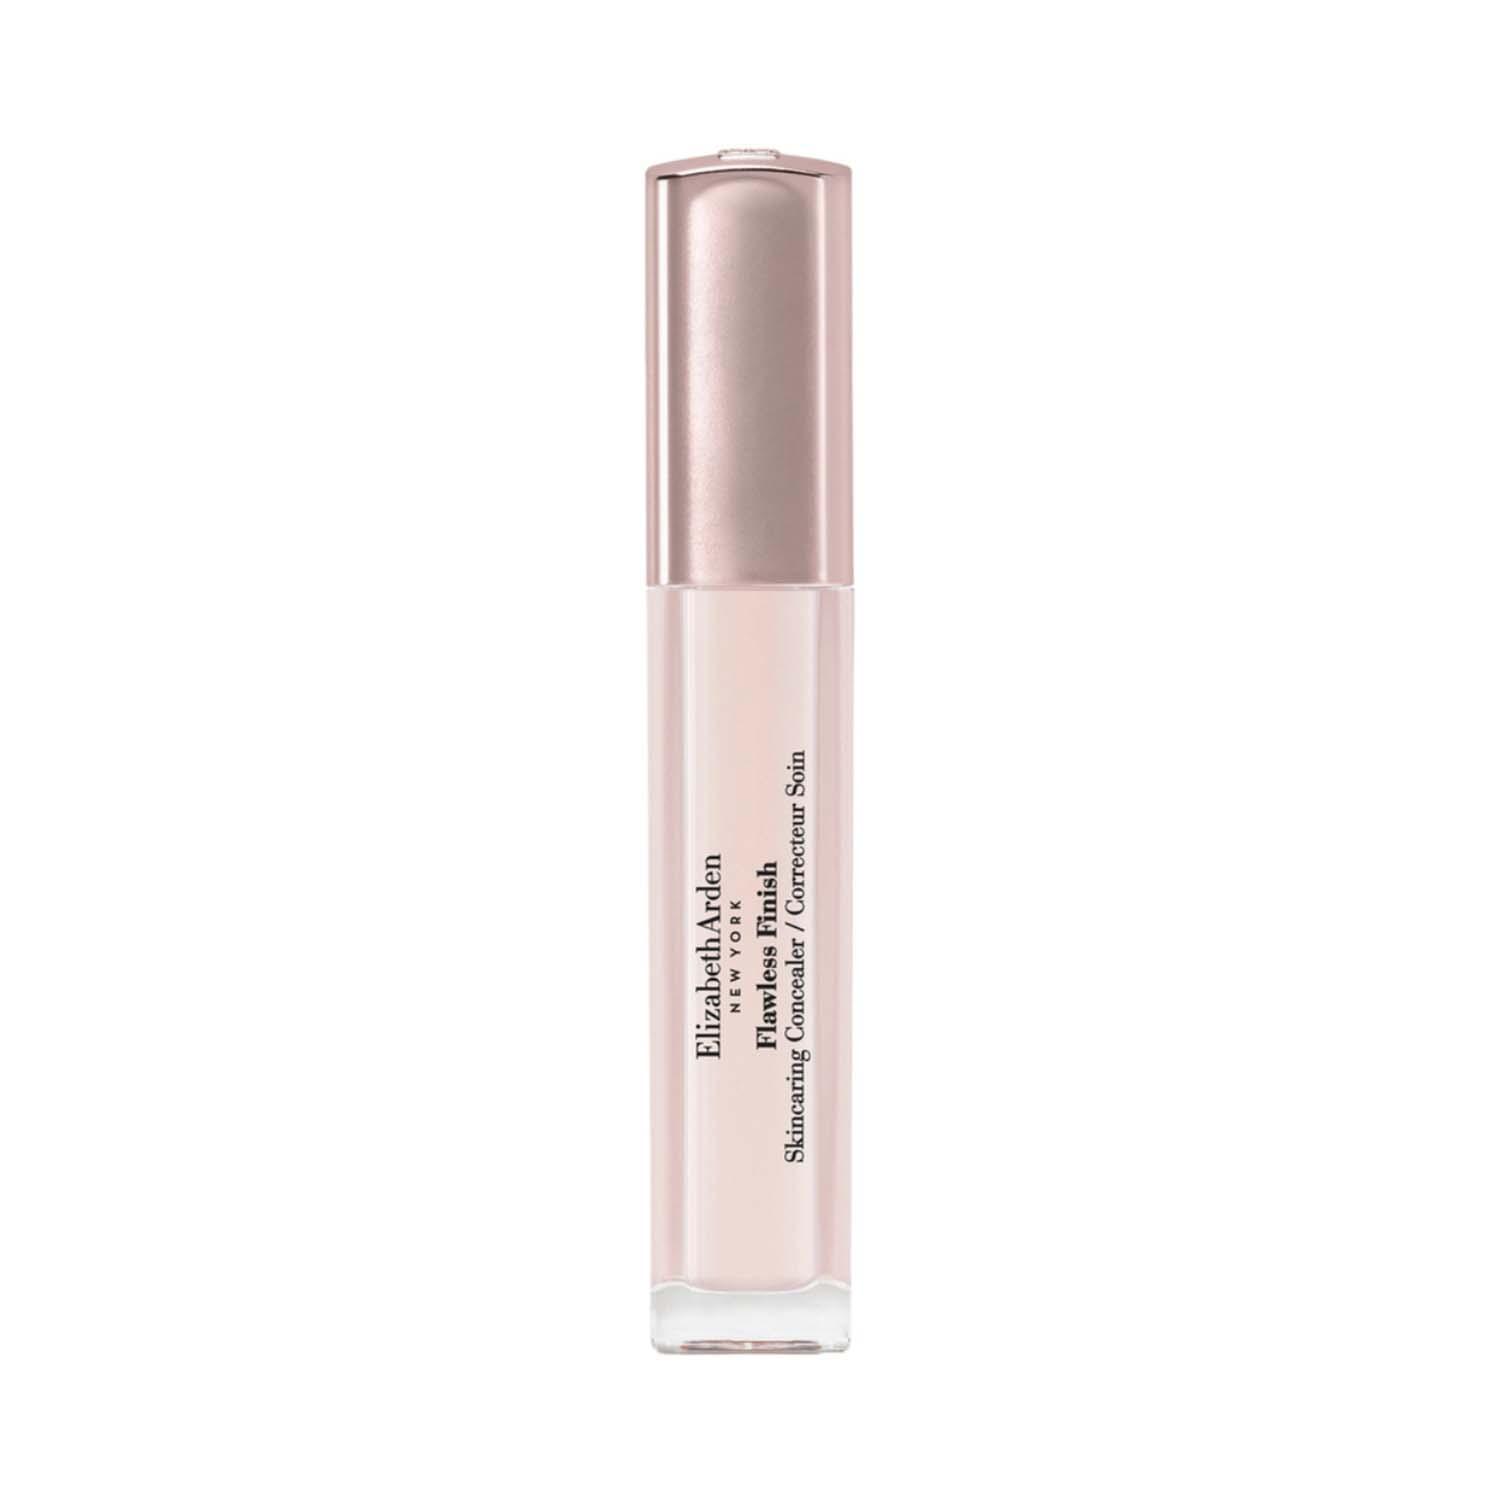 Elizabeth Arden | Flawless Finish Skincaring Concealer - Shade 3 - Fair With Cool Tones (7 ml)